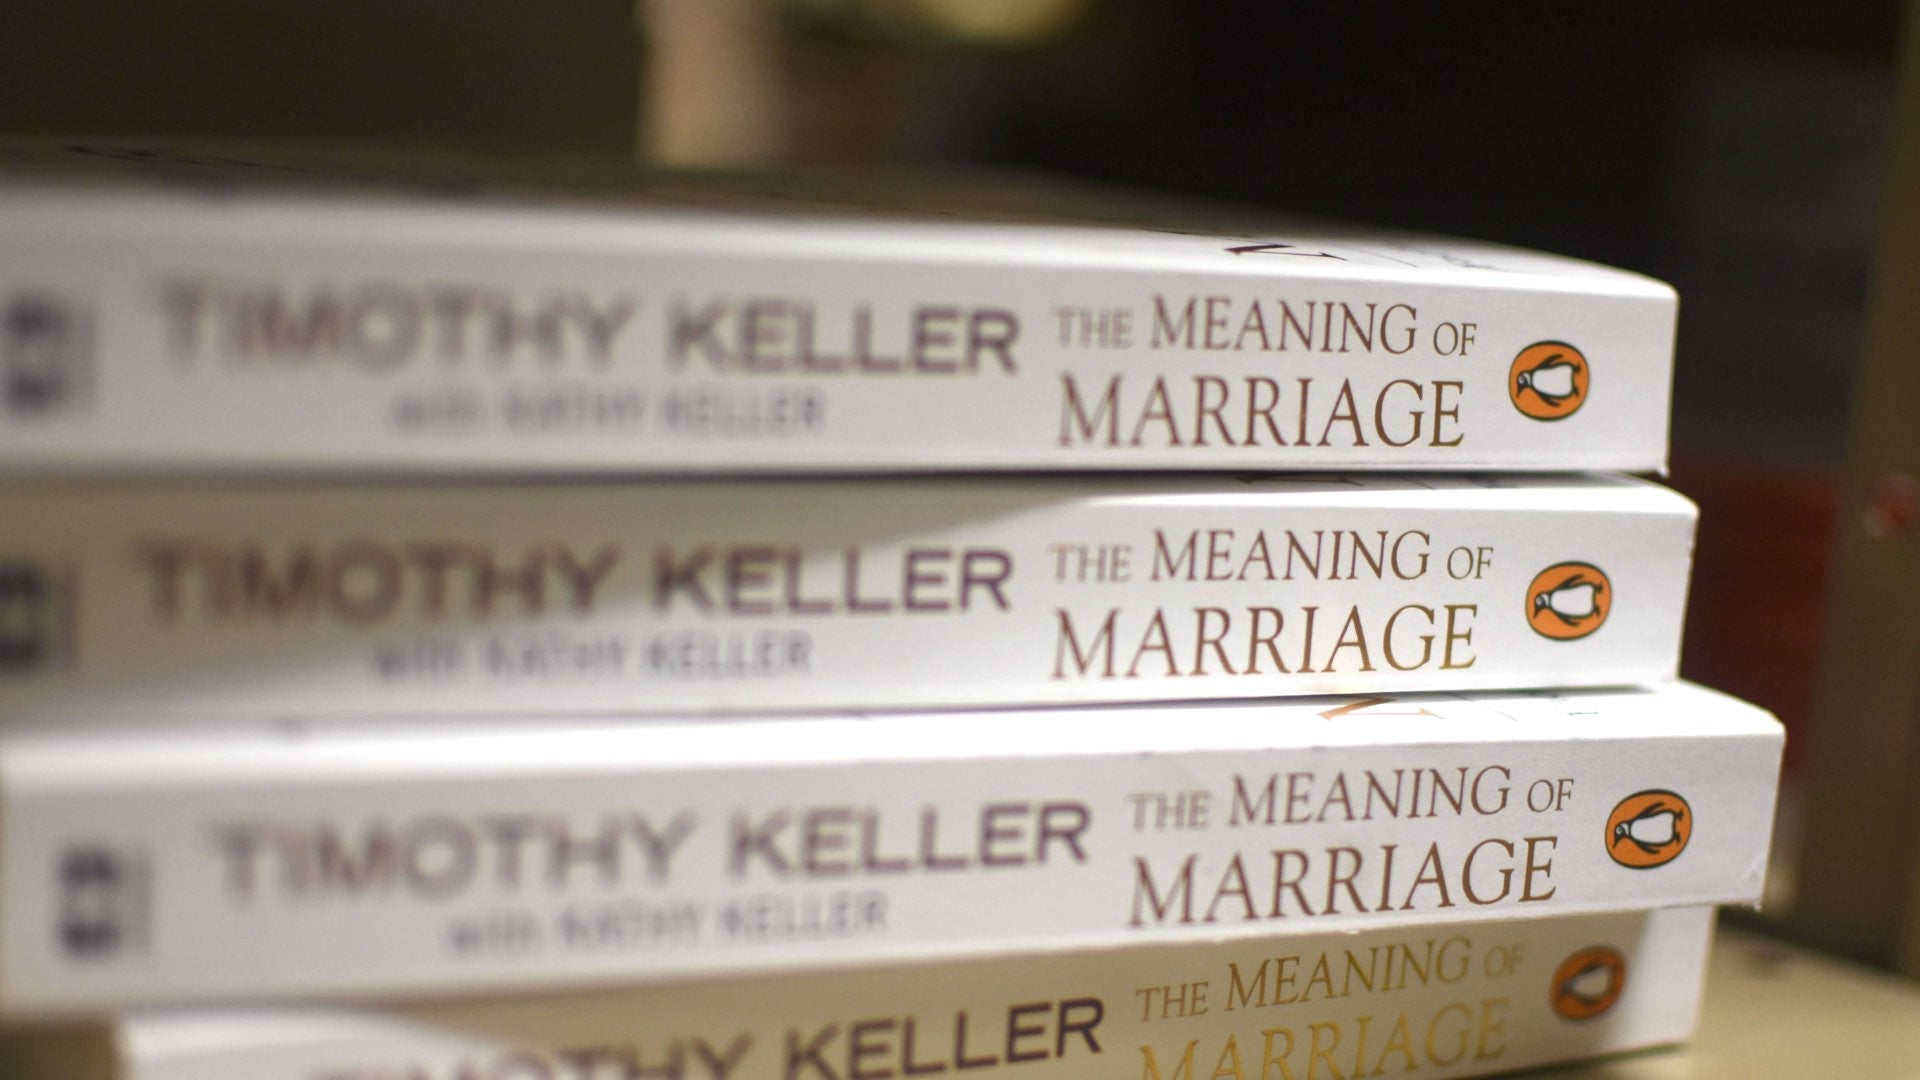 marriage counseling books free download